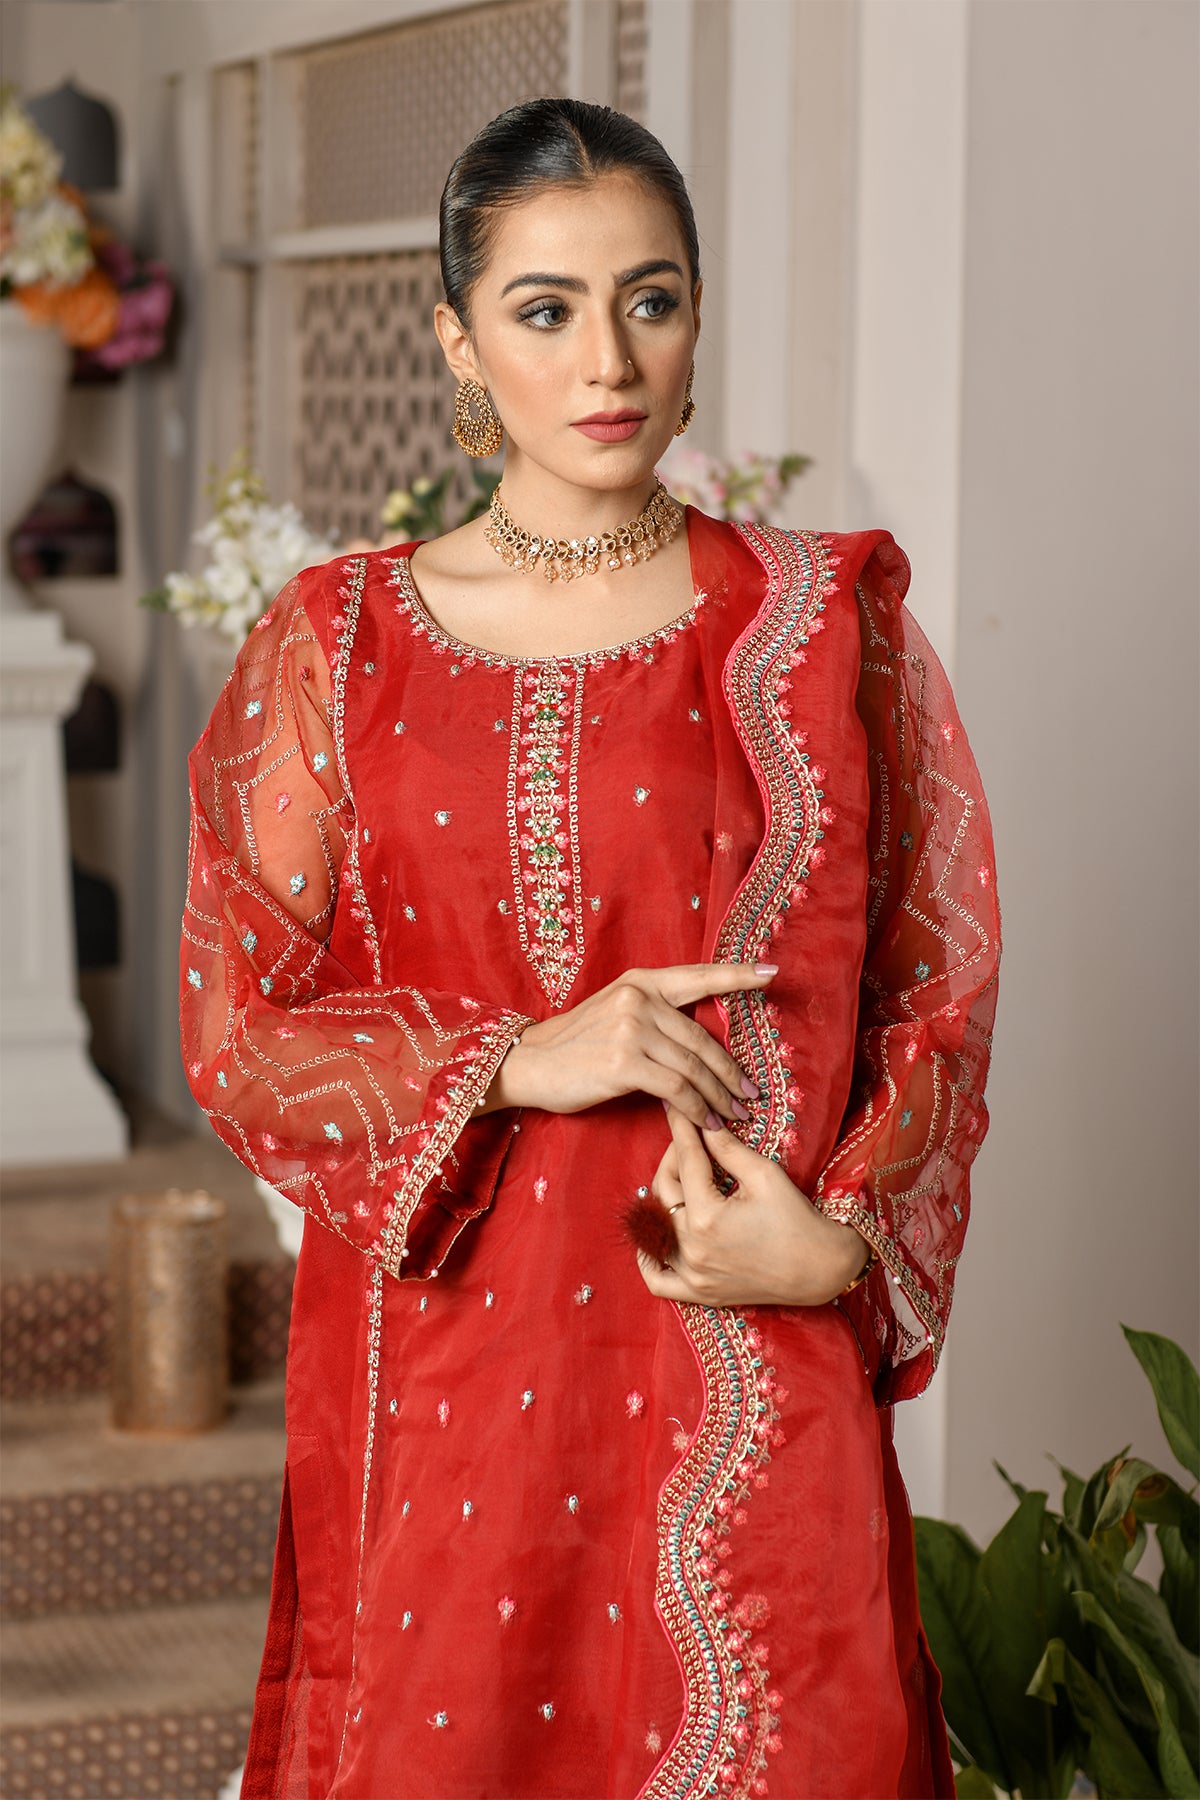 Dyed Embroidered Chiffon 3 Piece Suit Mf-010